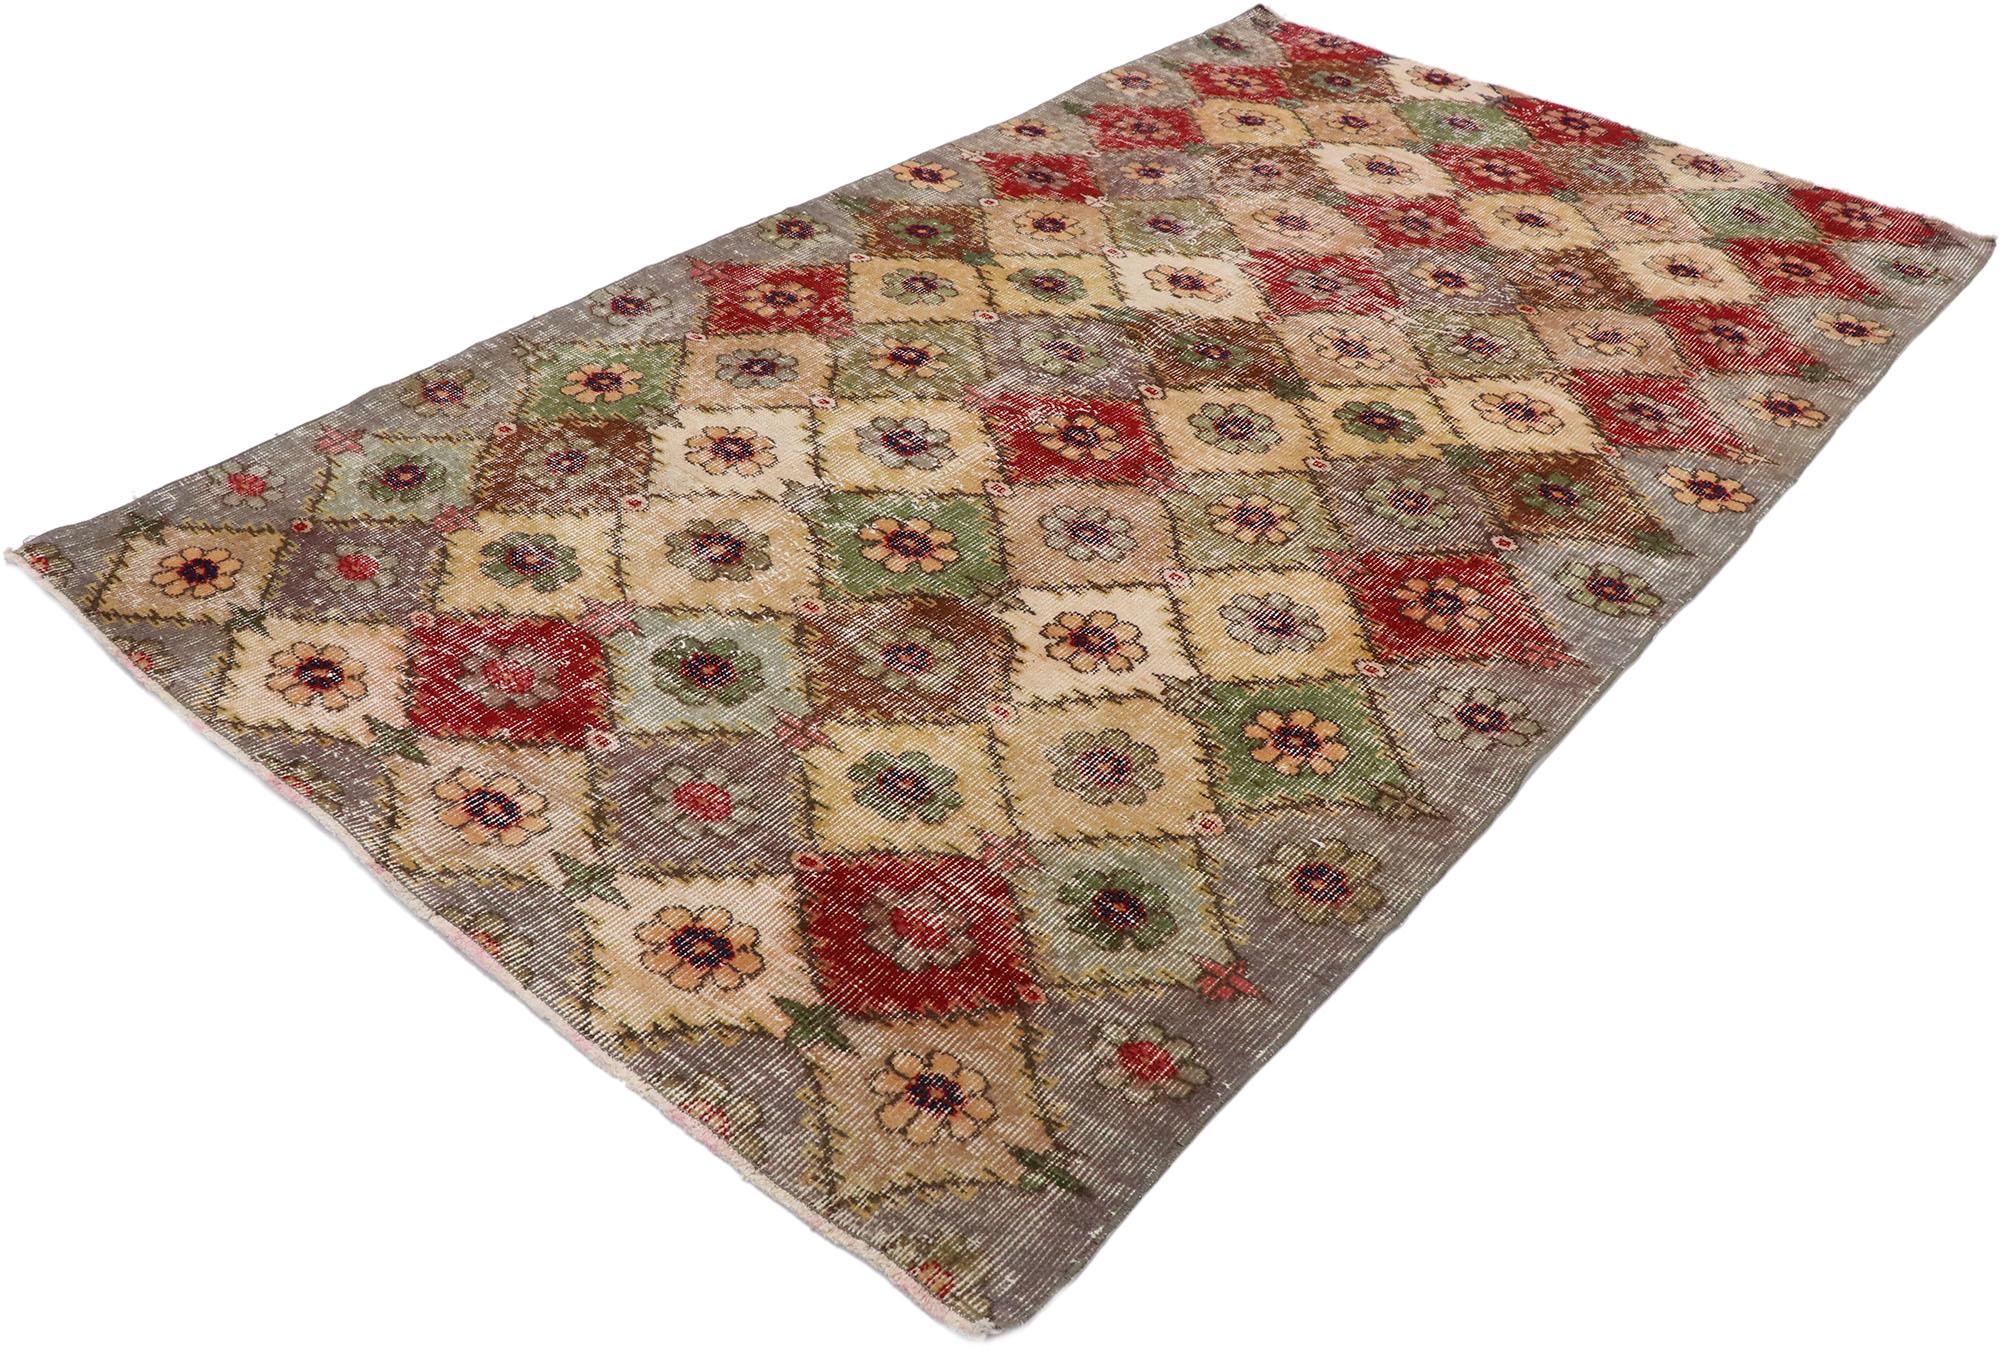 53332, Distressed Vintage Turkish Sivas Rug with Romantic Shabby Chic Style. This hand knotted wool distressed vintage Turkish Sivas rug features an all-over lattice pattern comprised of diamonds in alternating colors each containing a lovely